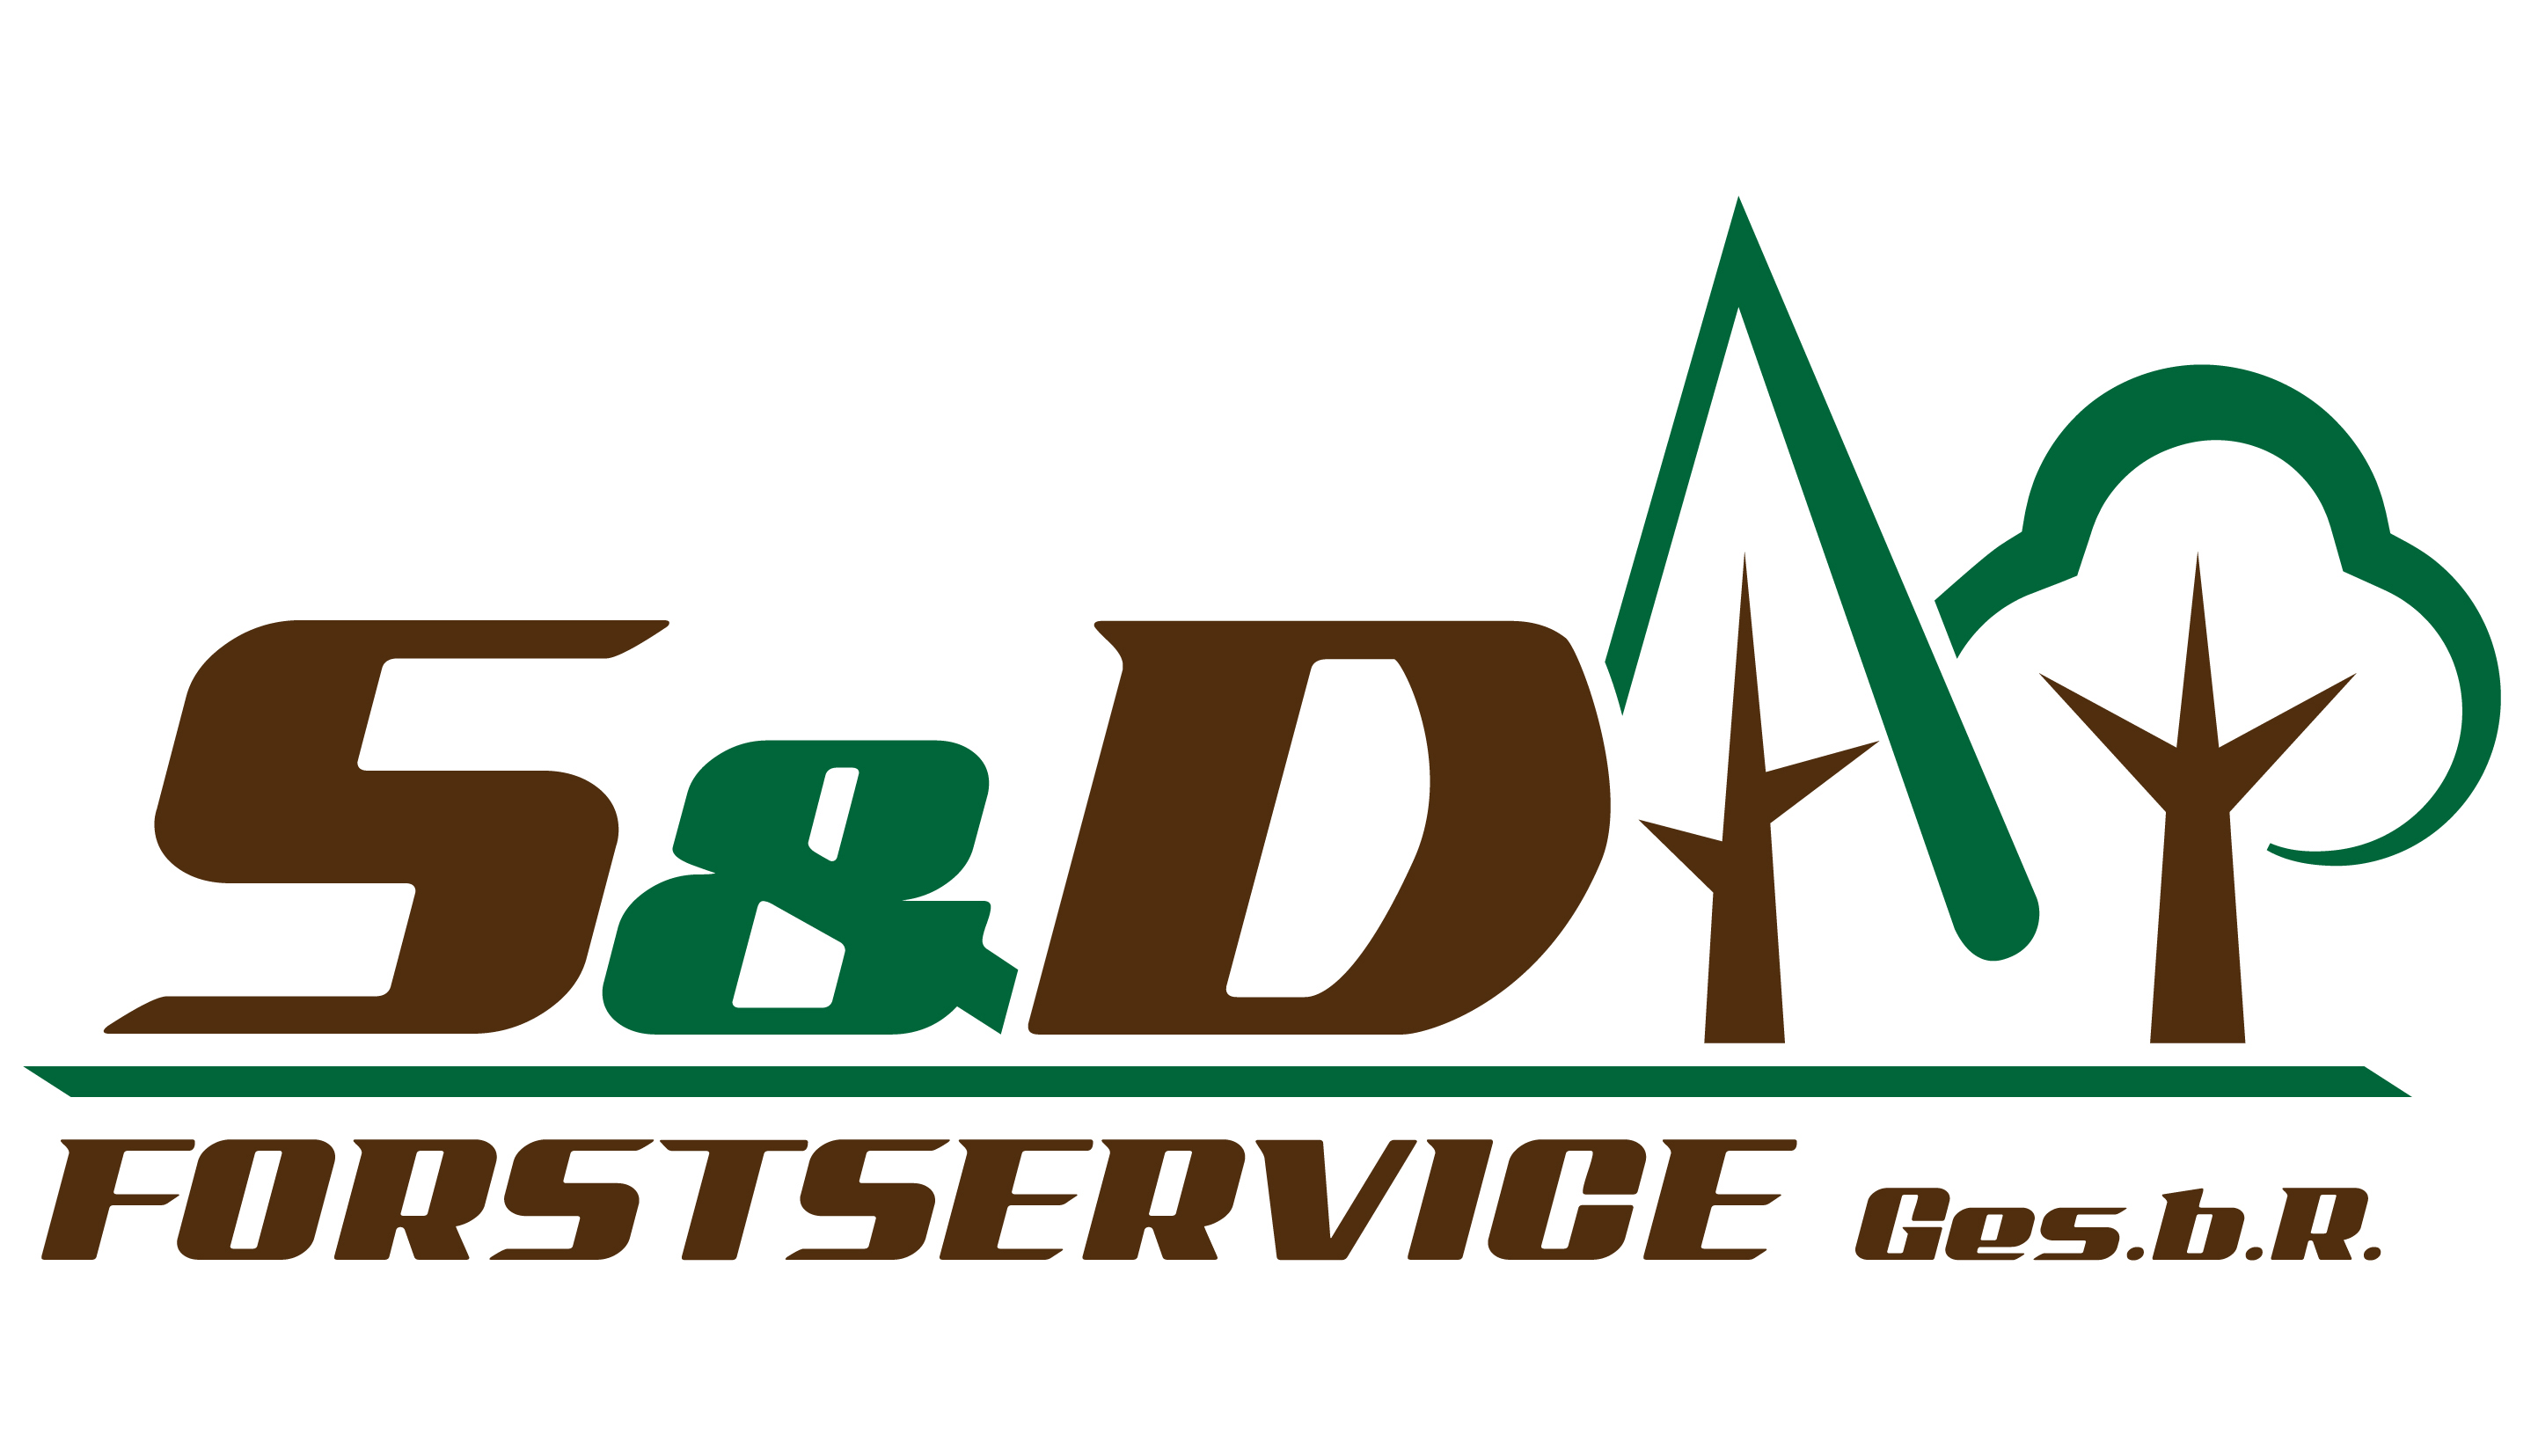 S&D Forstservice Ges.b.R